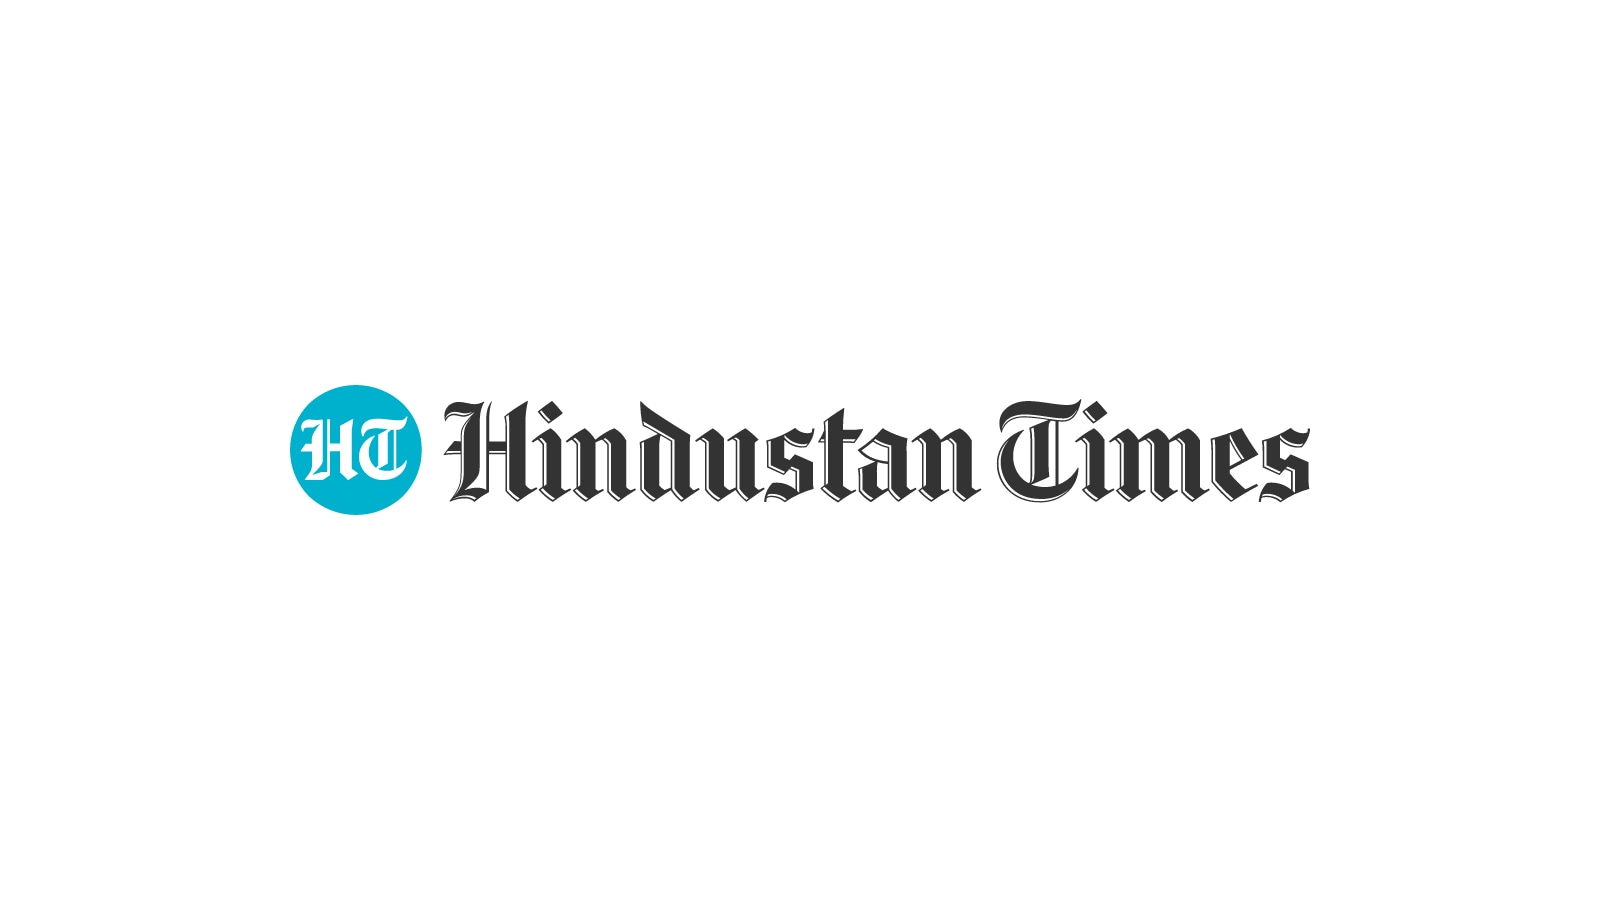 https://www.hindustantimes.com/cities/gurugram-news/residents-fall-ill-water-contamination-suspected-101618769968843.html contamination in water...